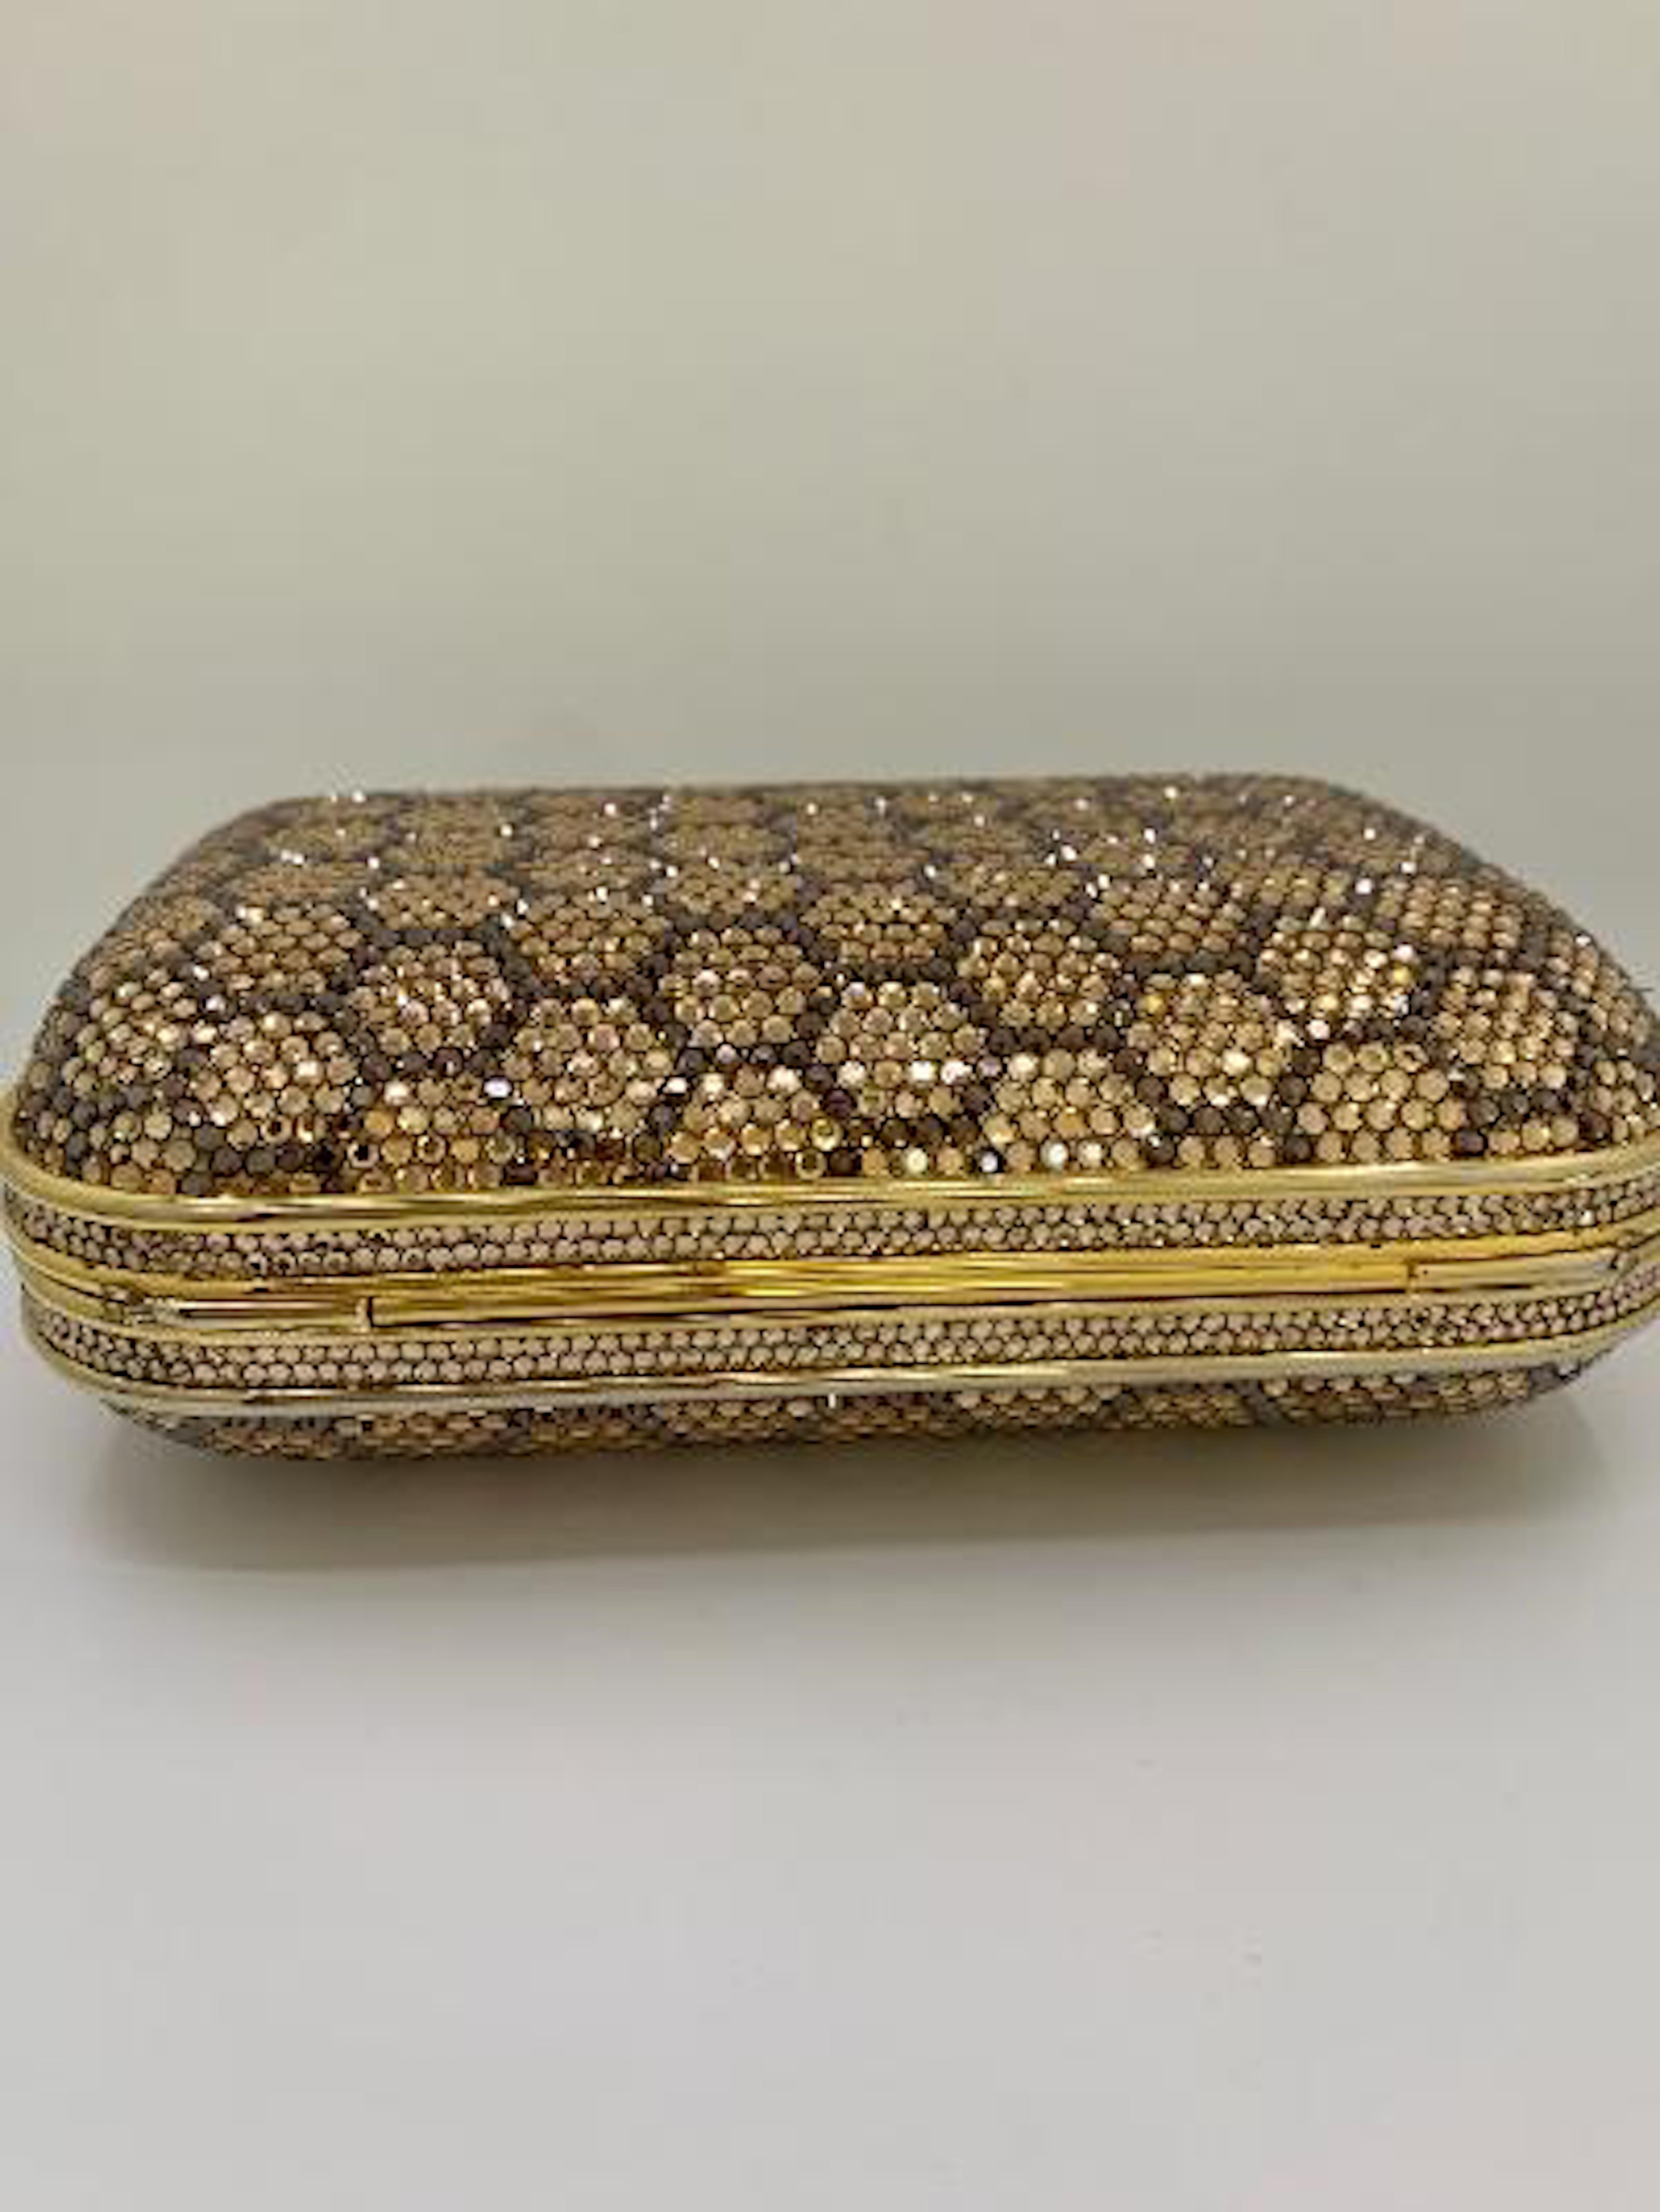 Dazzling Judith Leiber Crystal Minaudiere Evening Clutch With Honeycomb Design  4